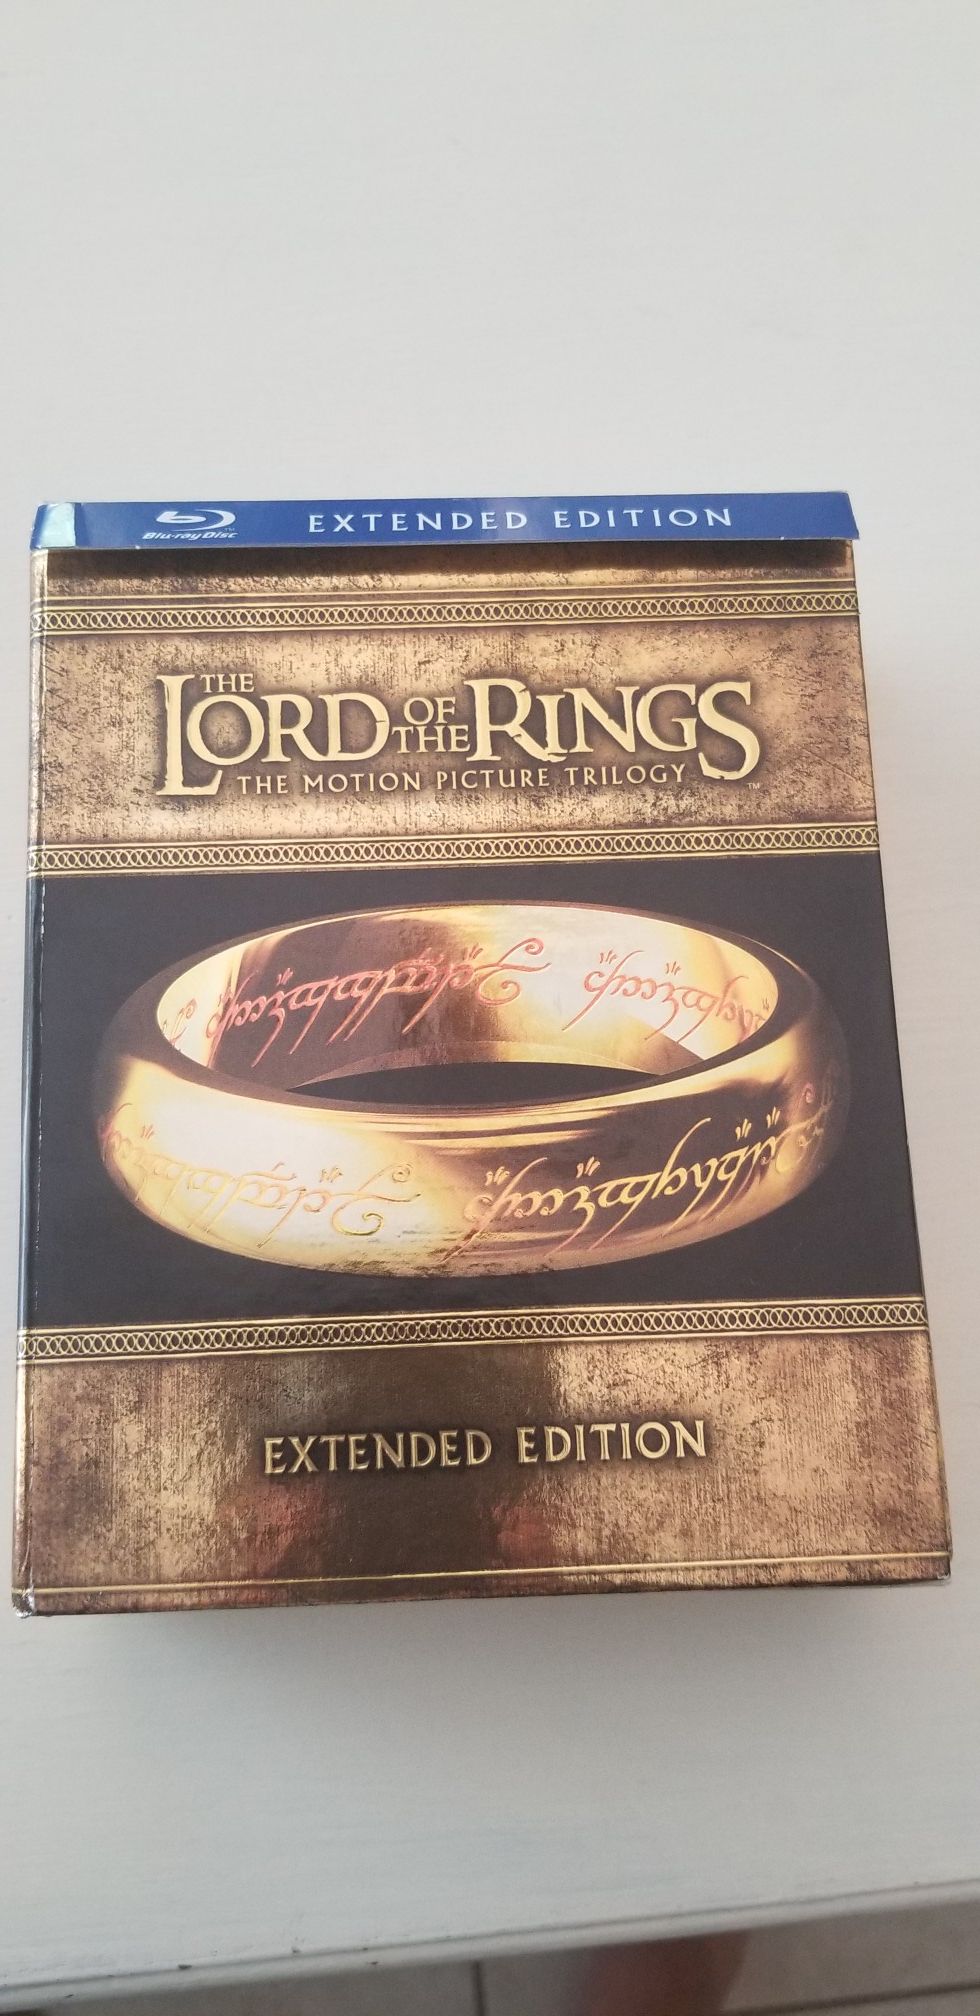 LORD OF THE RINGS EXTENDED EDITION TRILOGY BLU RAY DVD SET